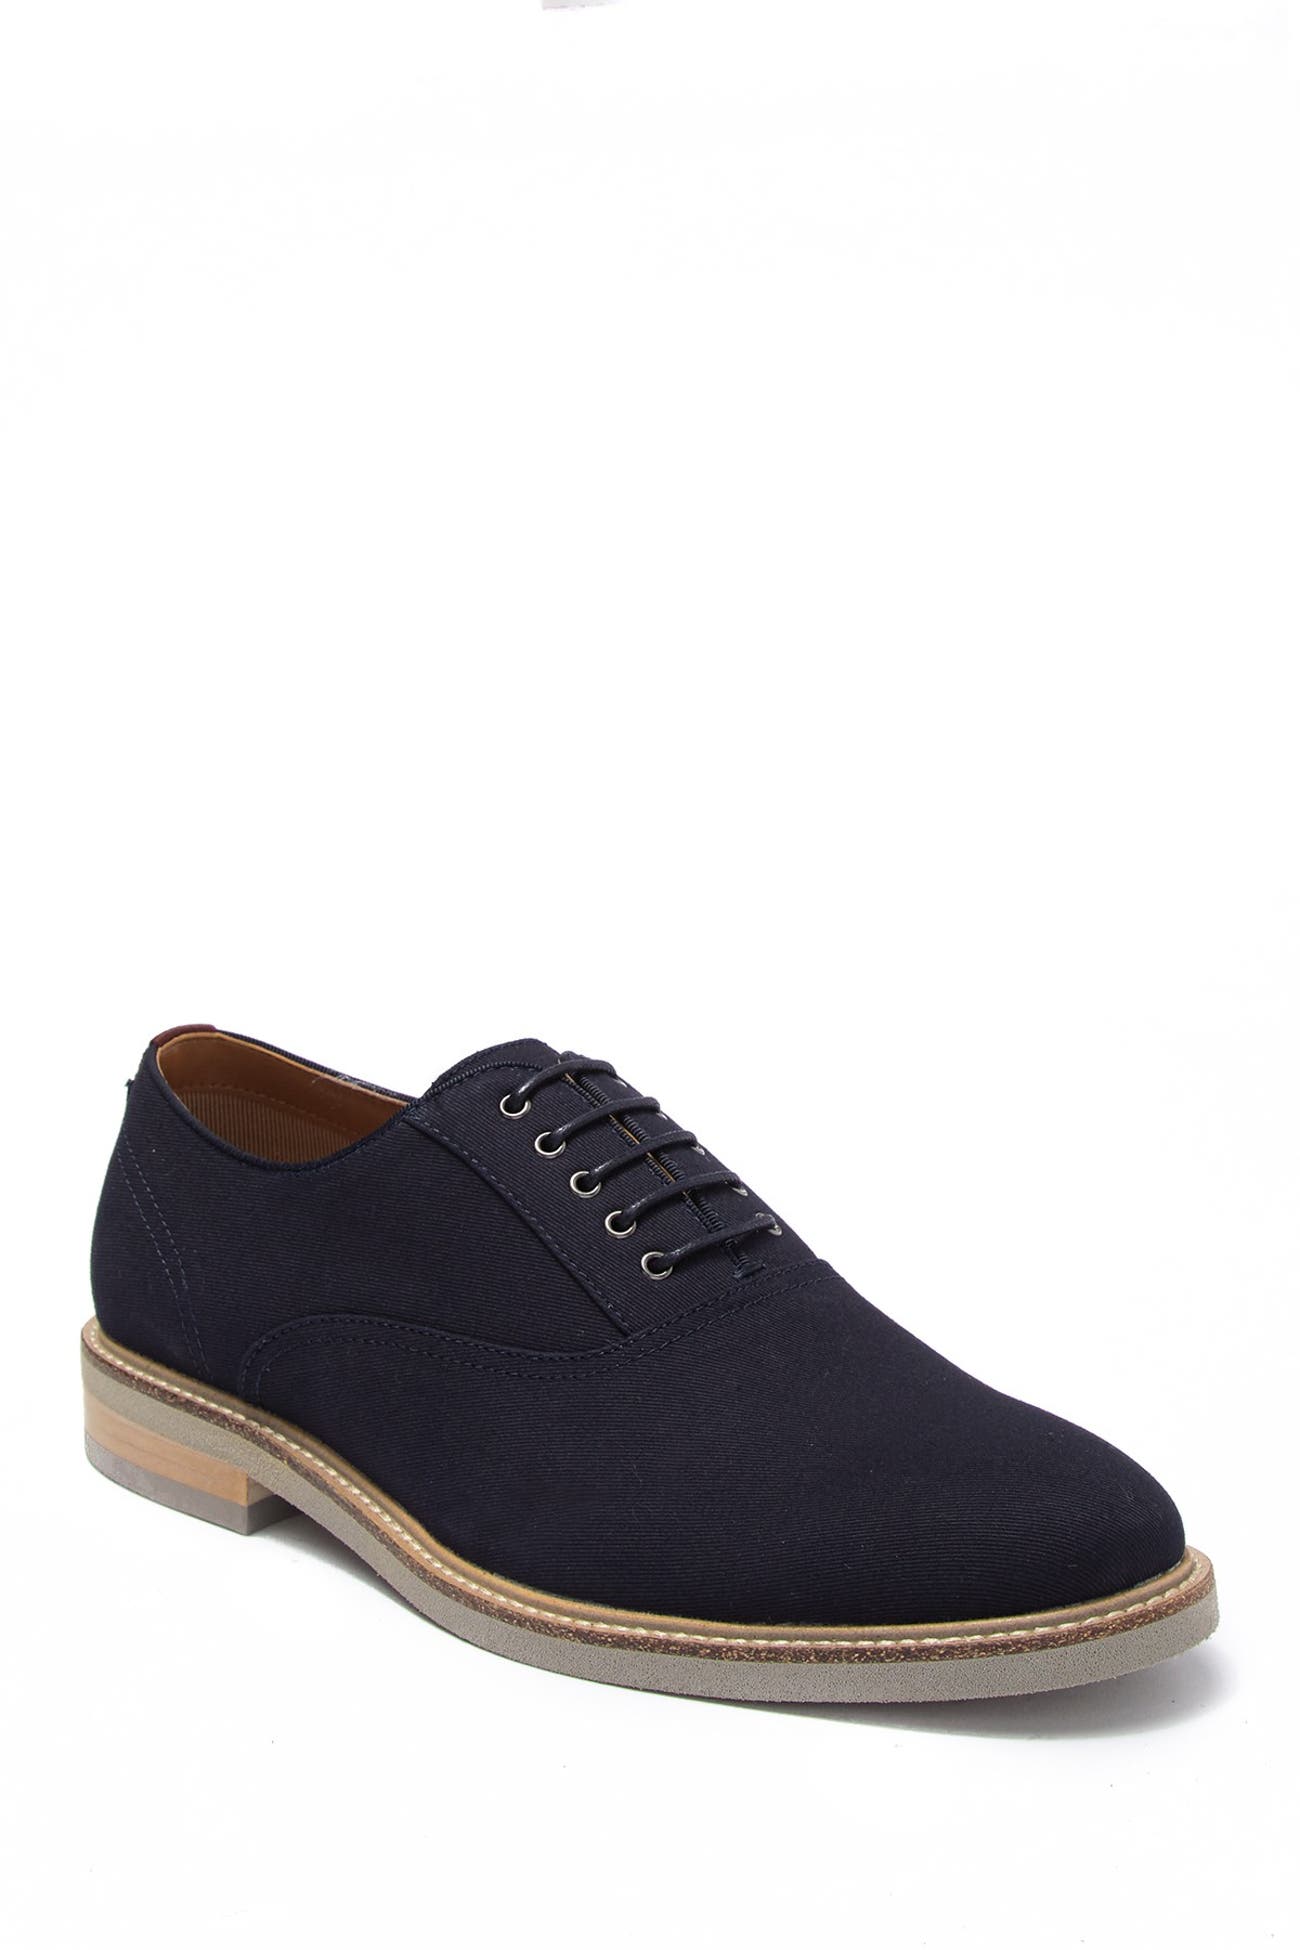 Steve Madden | Casual Lace-Up Oxford | Nordstrom Rack